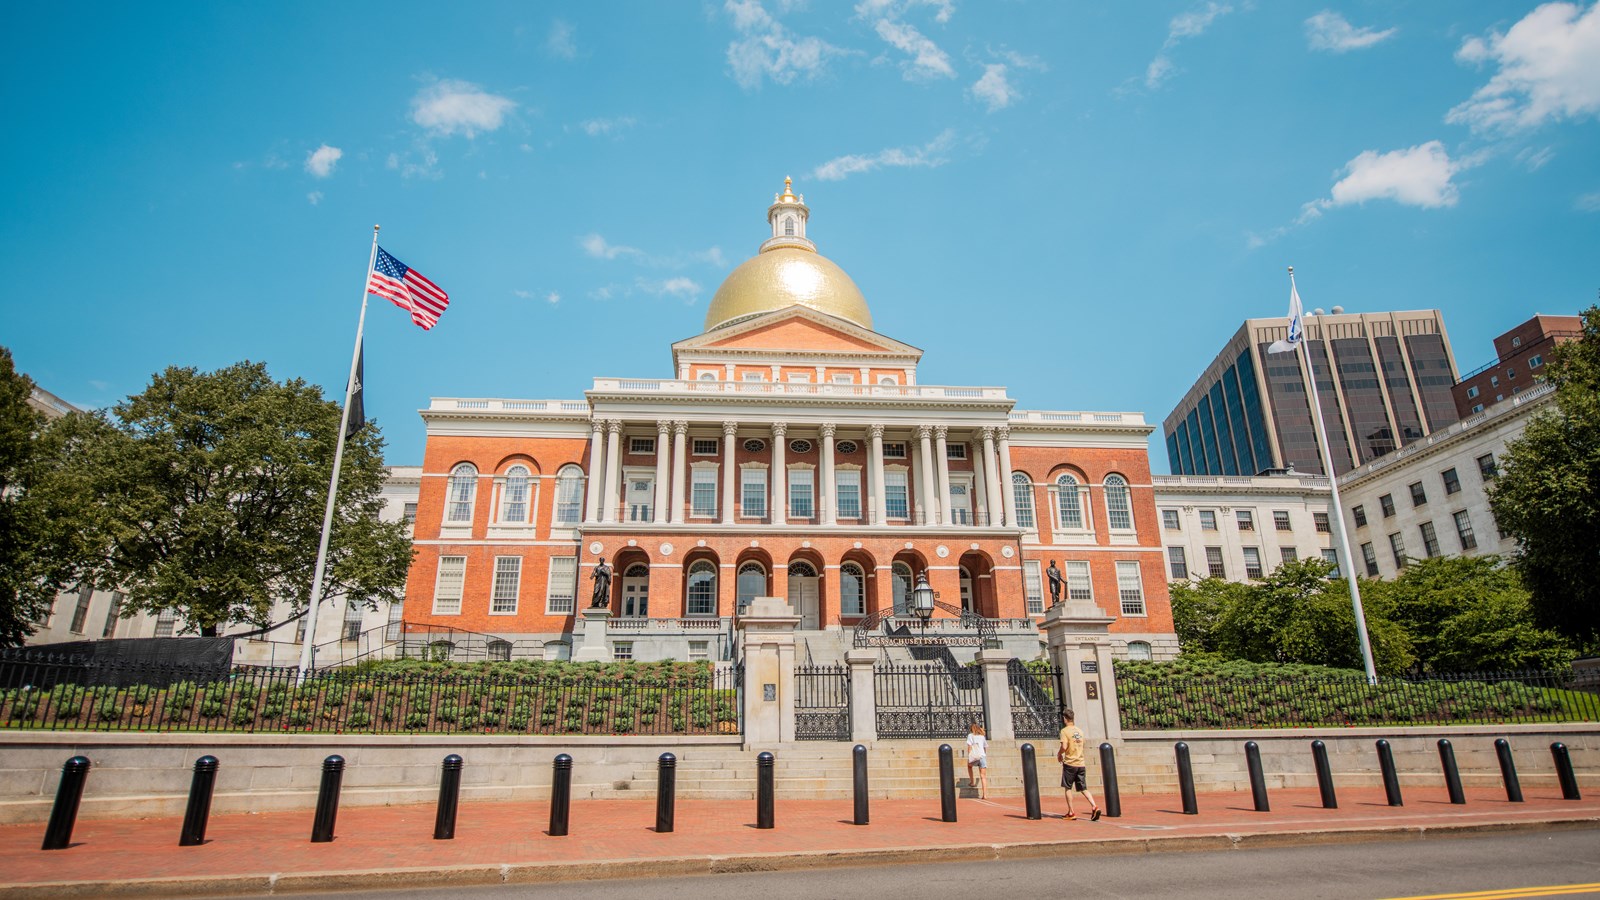 Red brick and white trimmed State House with a gold dome against a blue sky.